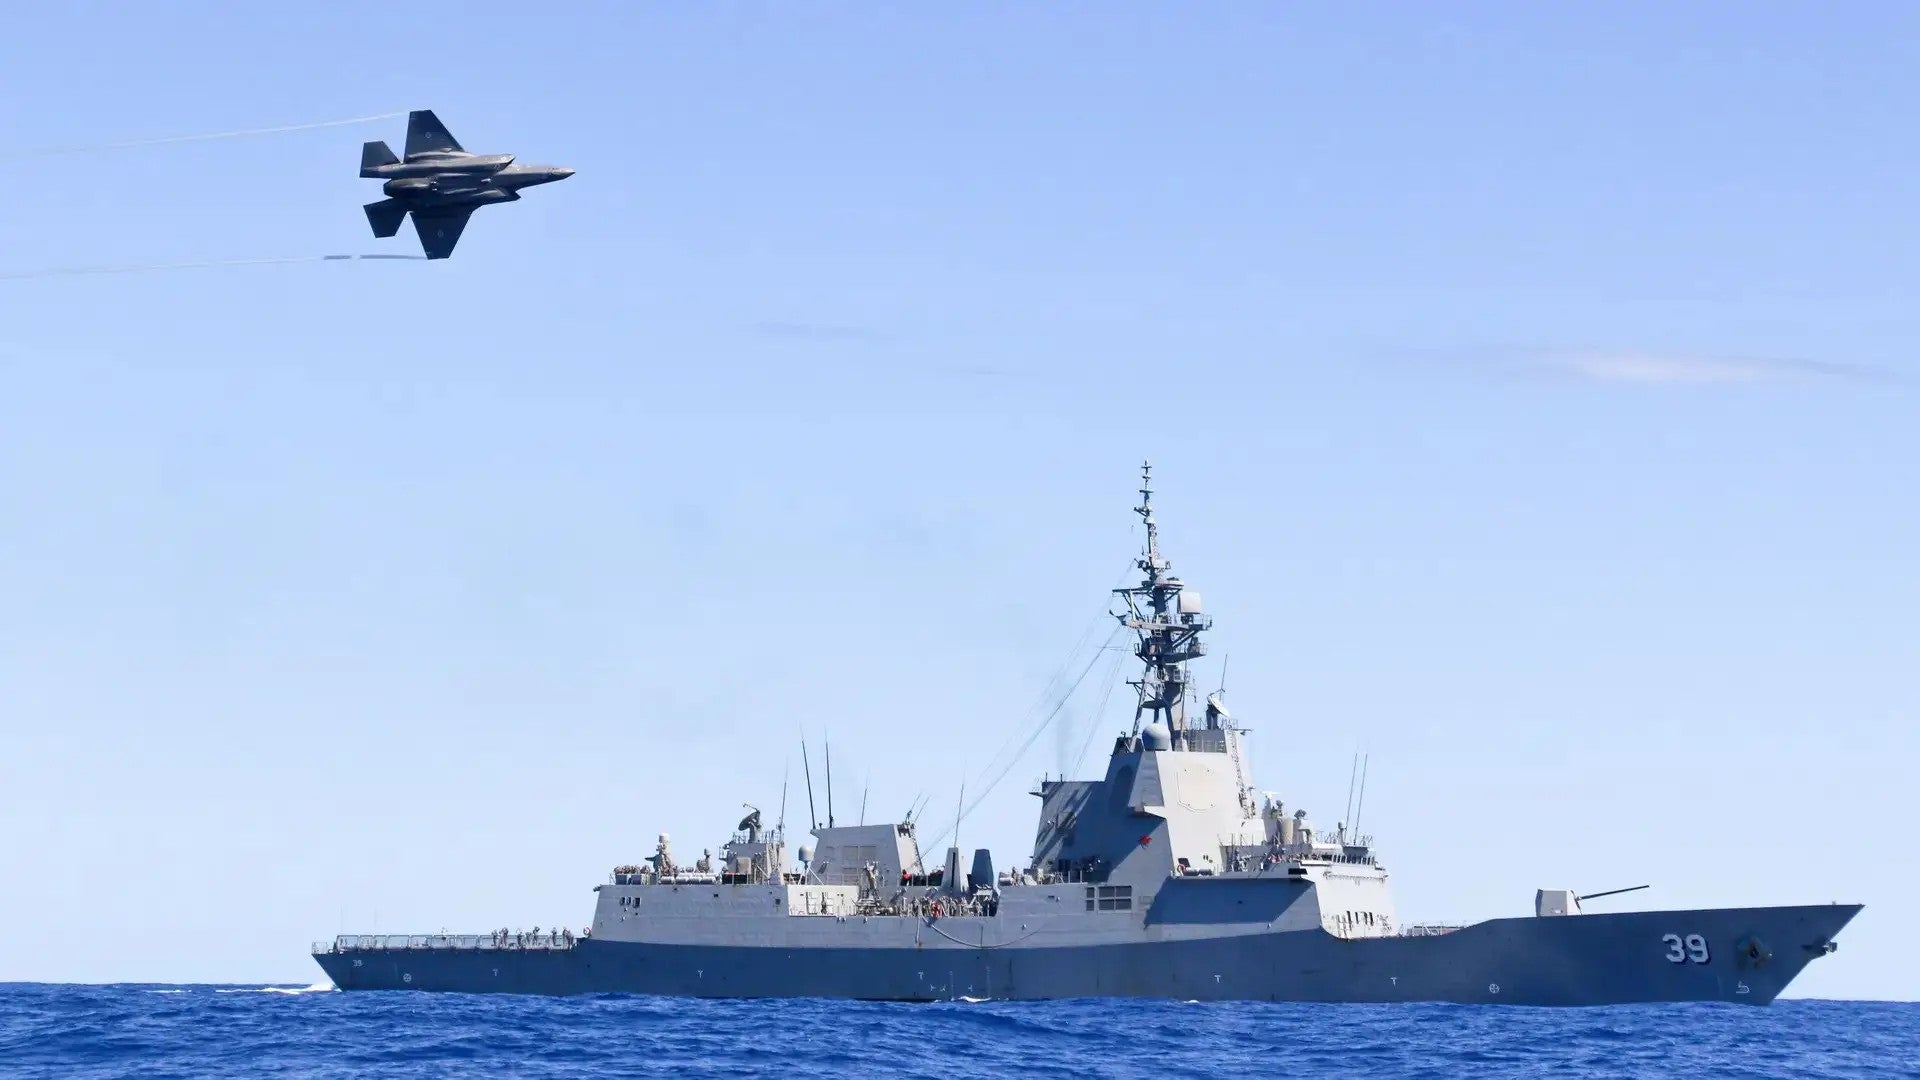 A Royal Australian Air Force F-35A Lightning conducts a flypast over HMAS Hobart during Exercise TASMAN SHIELD 21, off the east coast of Australia. Both these platforms are now set to receive new long-range strike missiles. Australian Department of Defense 